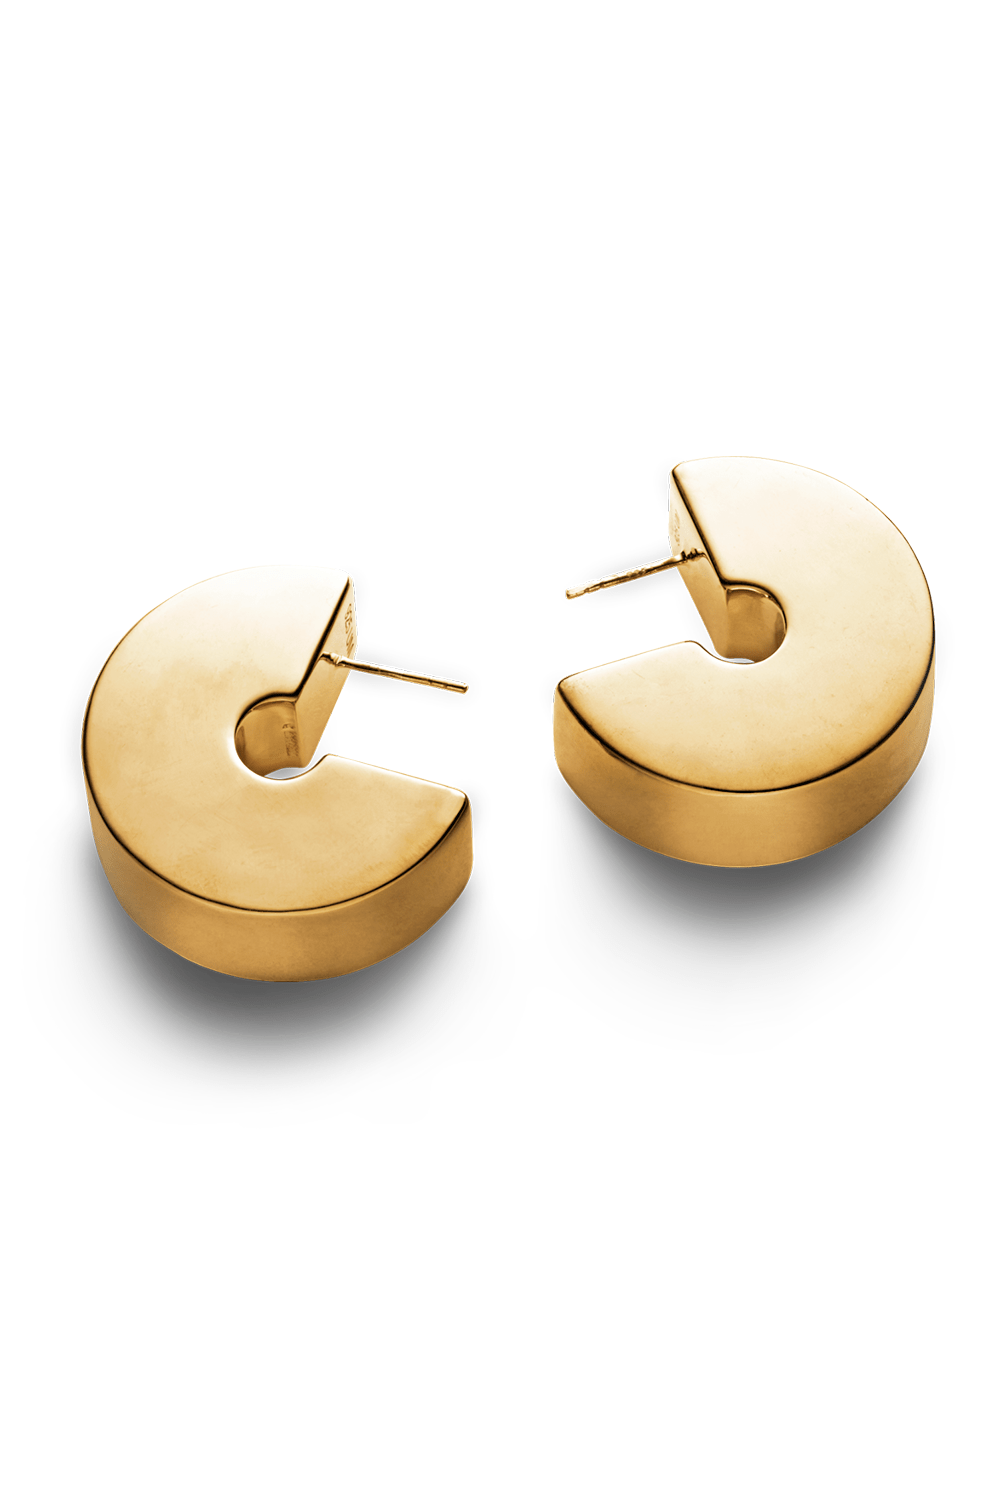 UNCOMMON MATTERS-Swash Earrings-GOLD